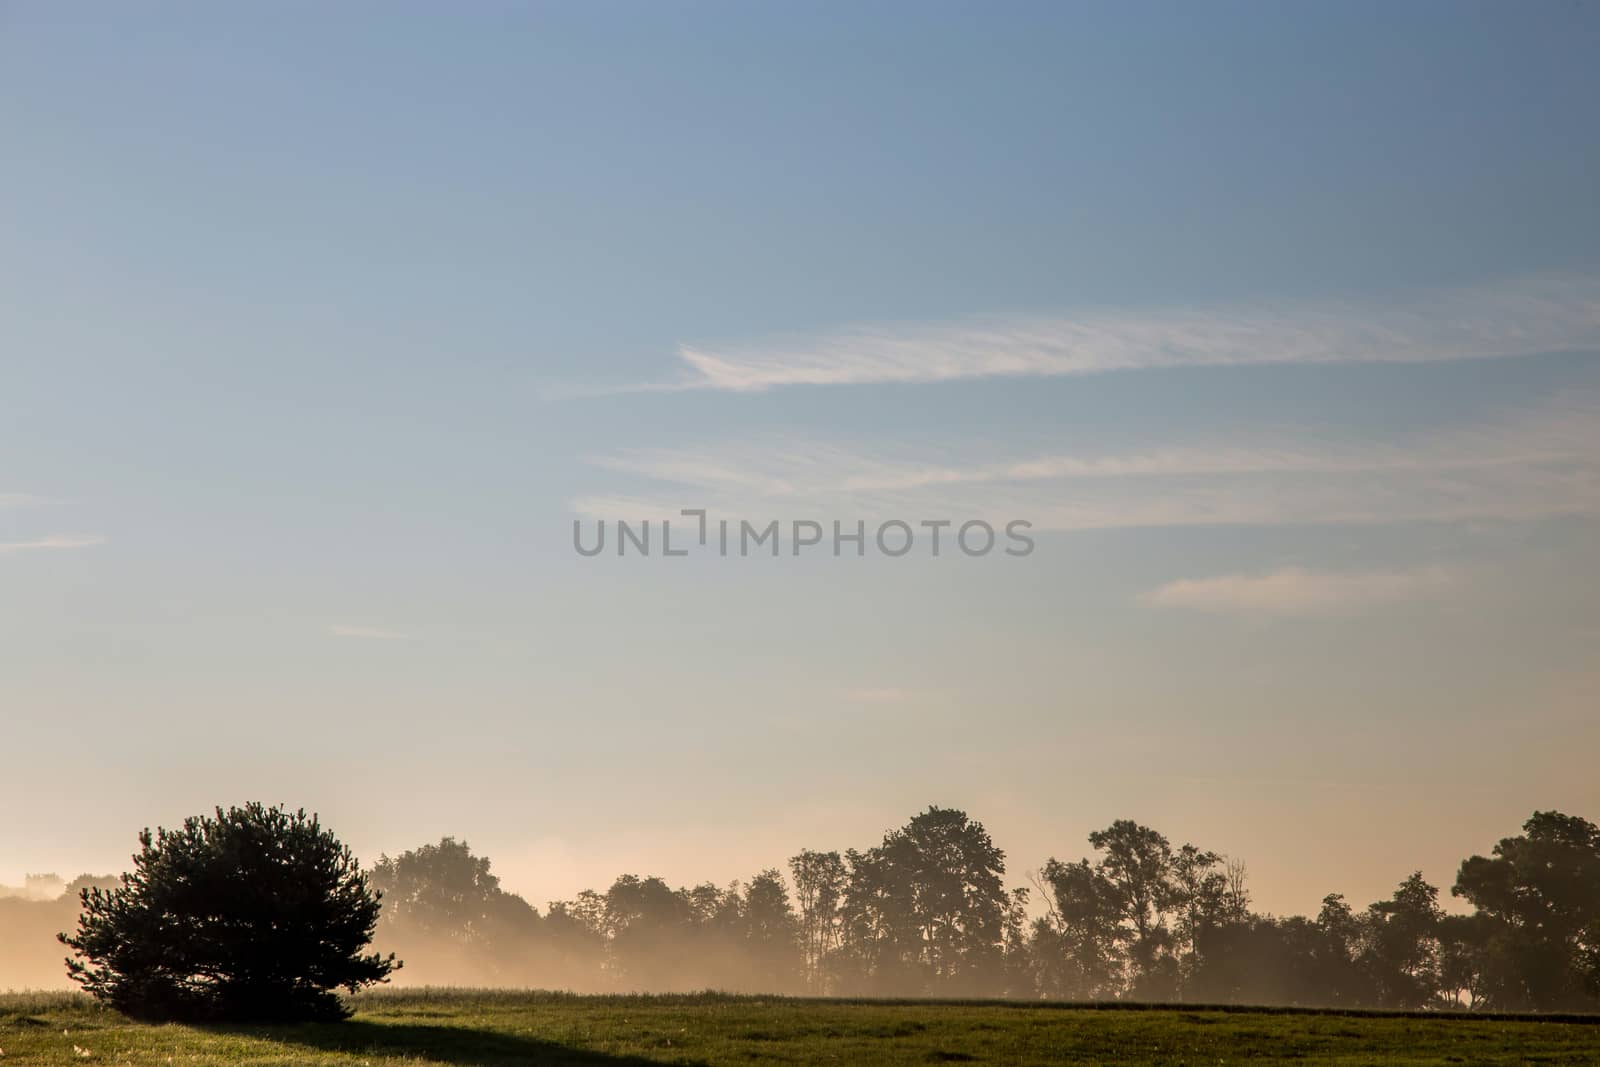 Summer landscape with green field and forest in fog. Classic rural landscape with mist in Latvia. Mist on the field in summer time.